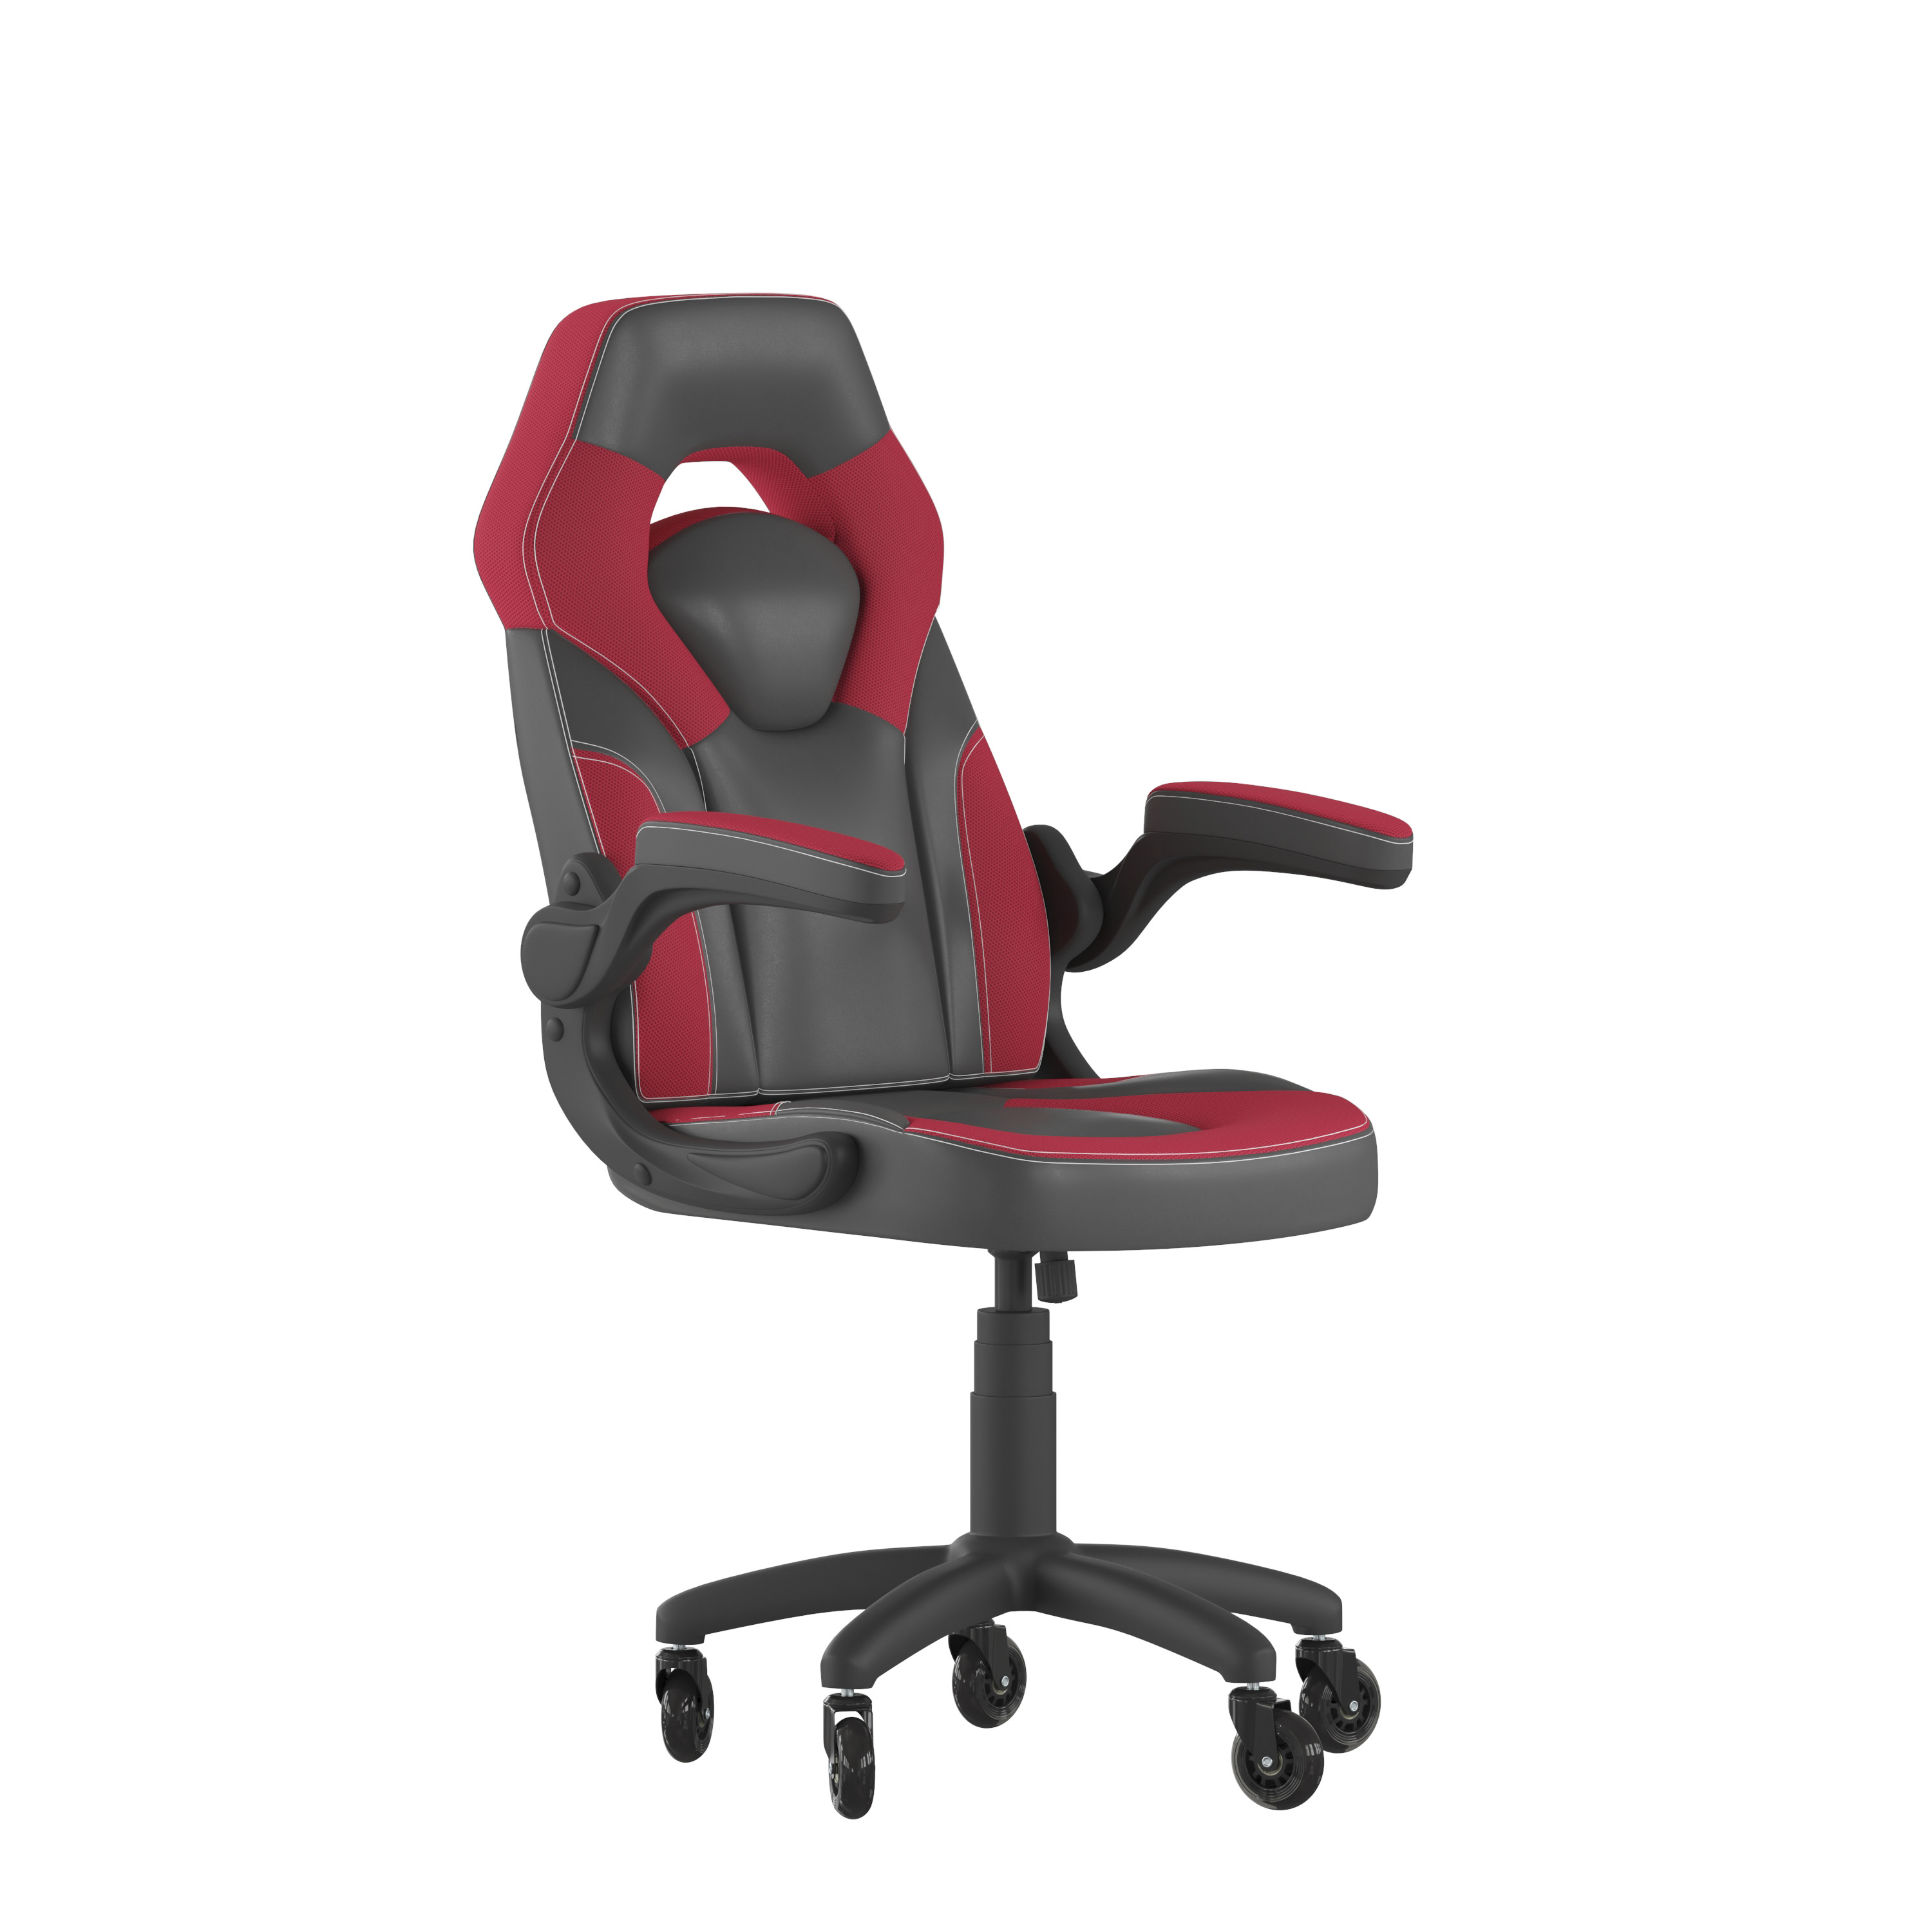 Flash Furniture CH-00095-RED-RLB-GG X10 Red/Black LeatherSoft Gaming / Racing Office Chair with Flip-up Arms and Transparent Roller Wheels